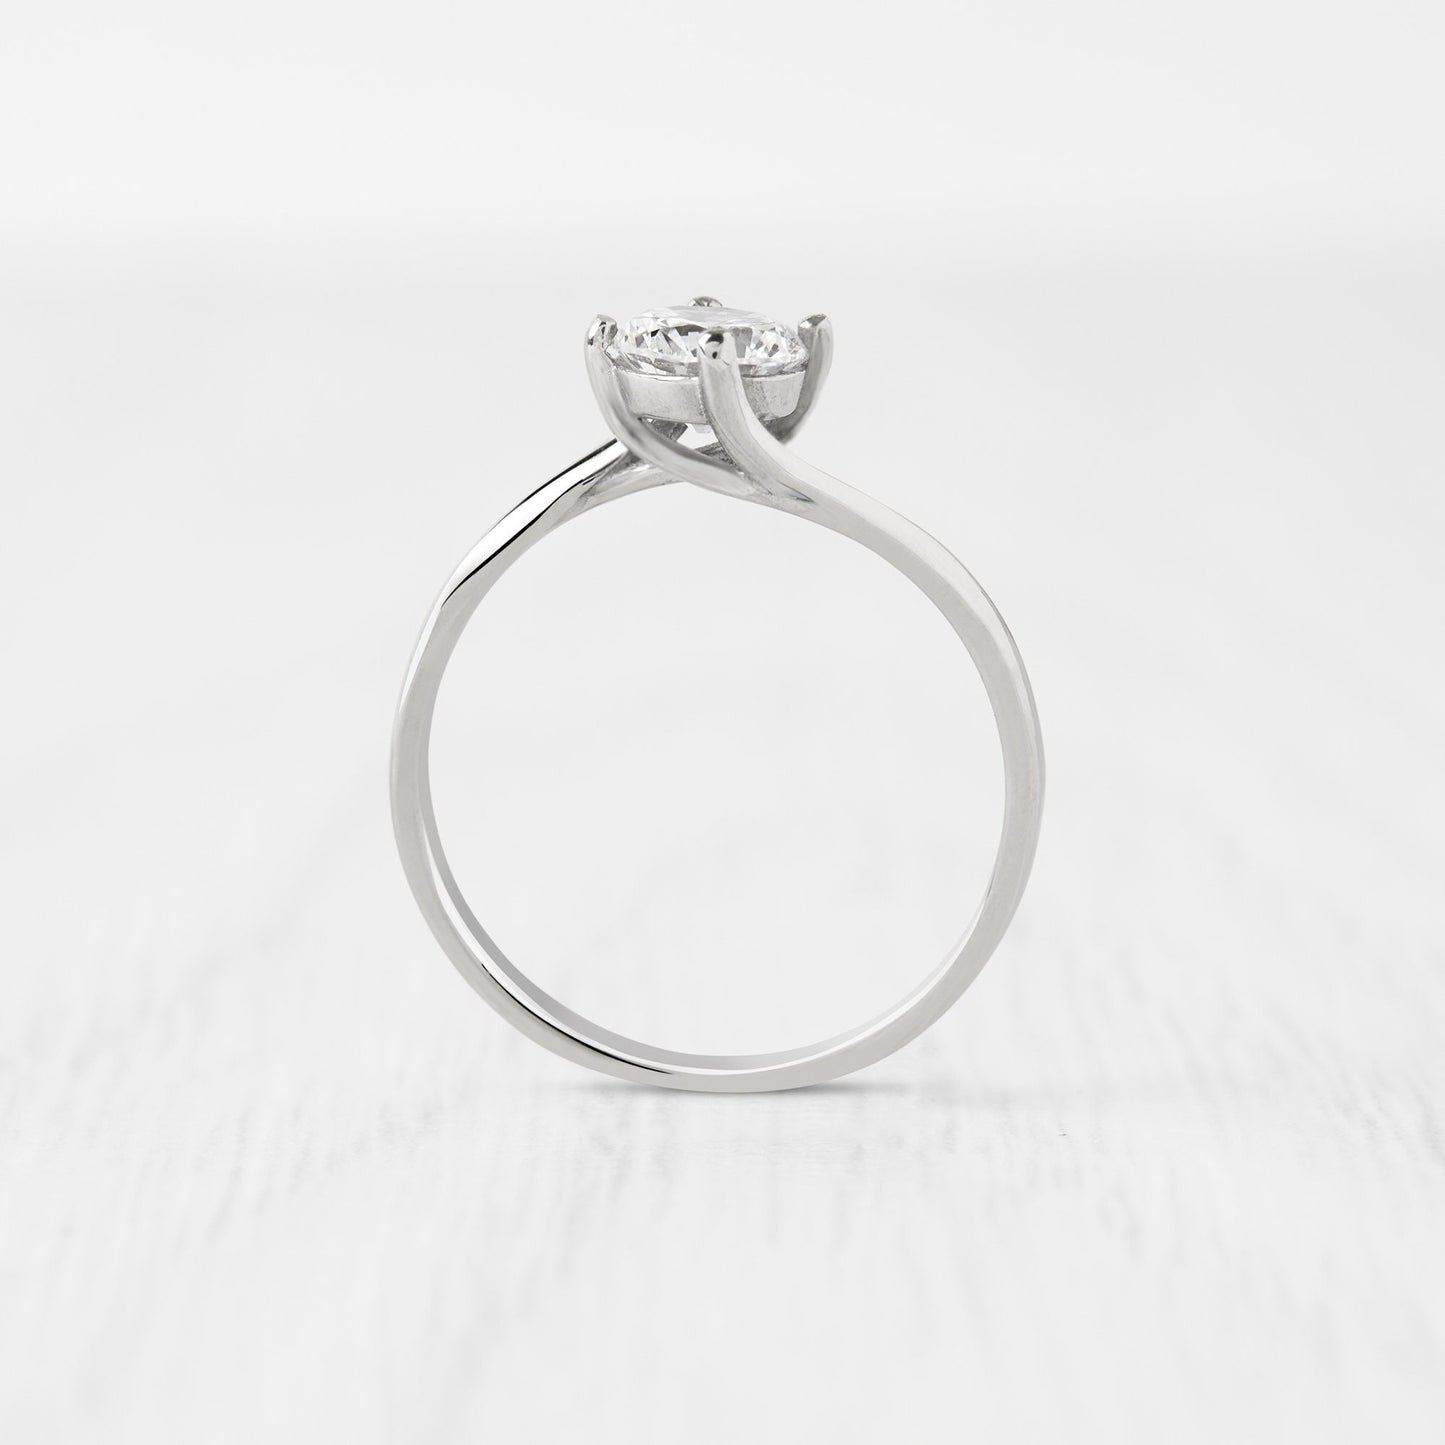 1ct Old European Diamond Simulant solitaire ring in Titanium or White Gold - engagement ring - wedding ring - handmade ring